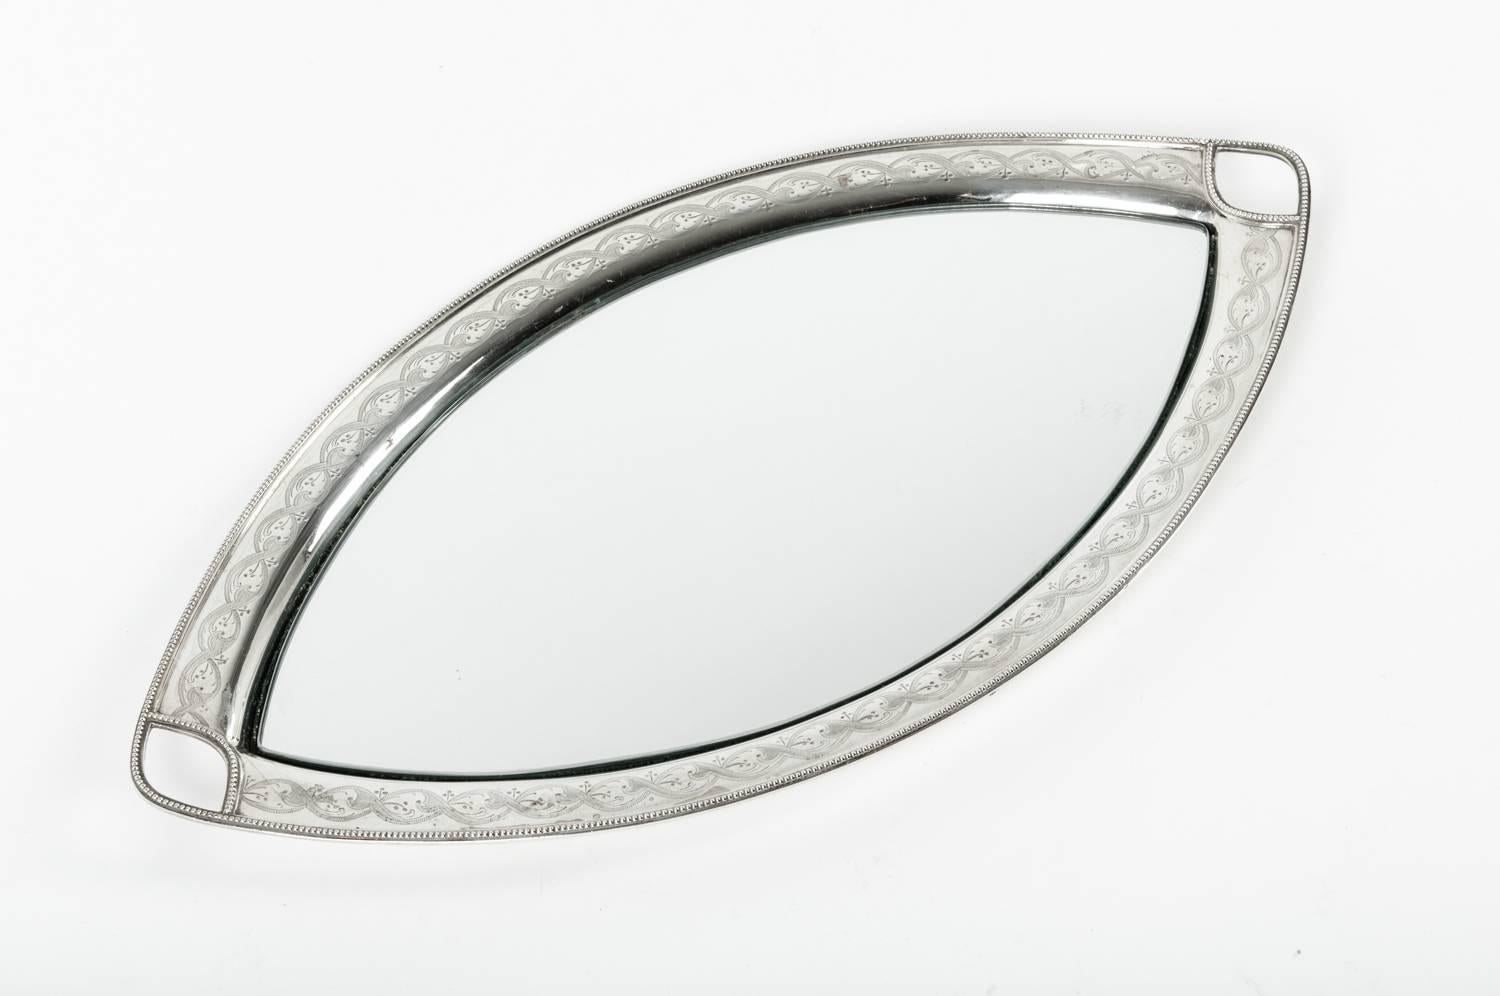 English silver plate footed oval shape with side handles vanity tray with mirror insert & exterior design details. The tray is great condition, minor wear consistent with age / use. Maker's mark undersigned. The tray measures about 21 inches long x